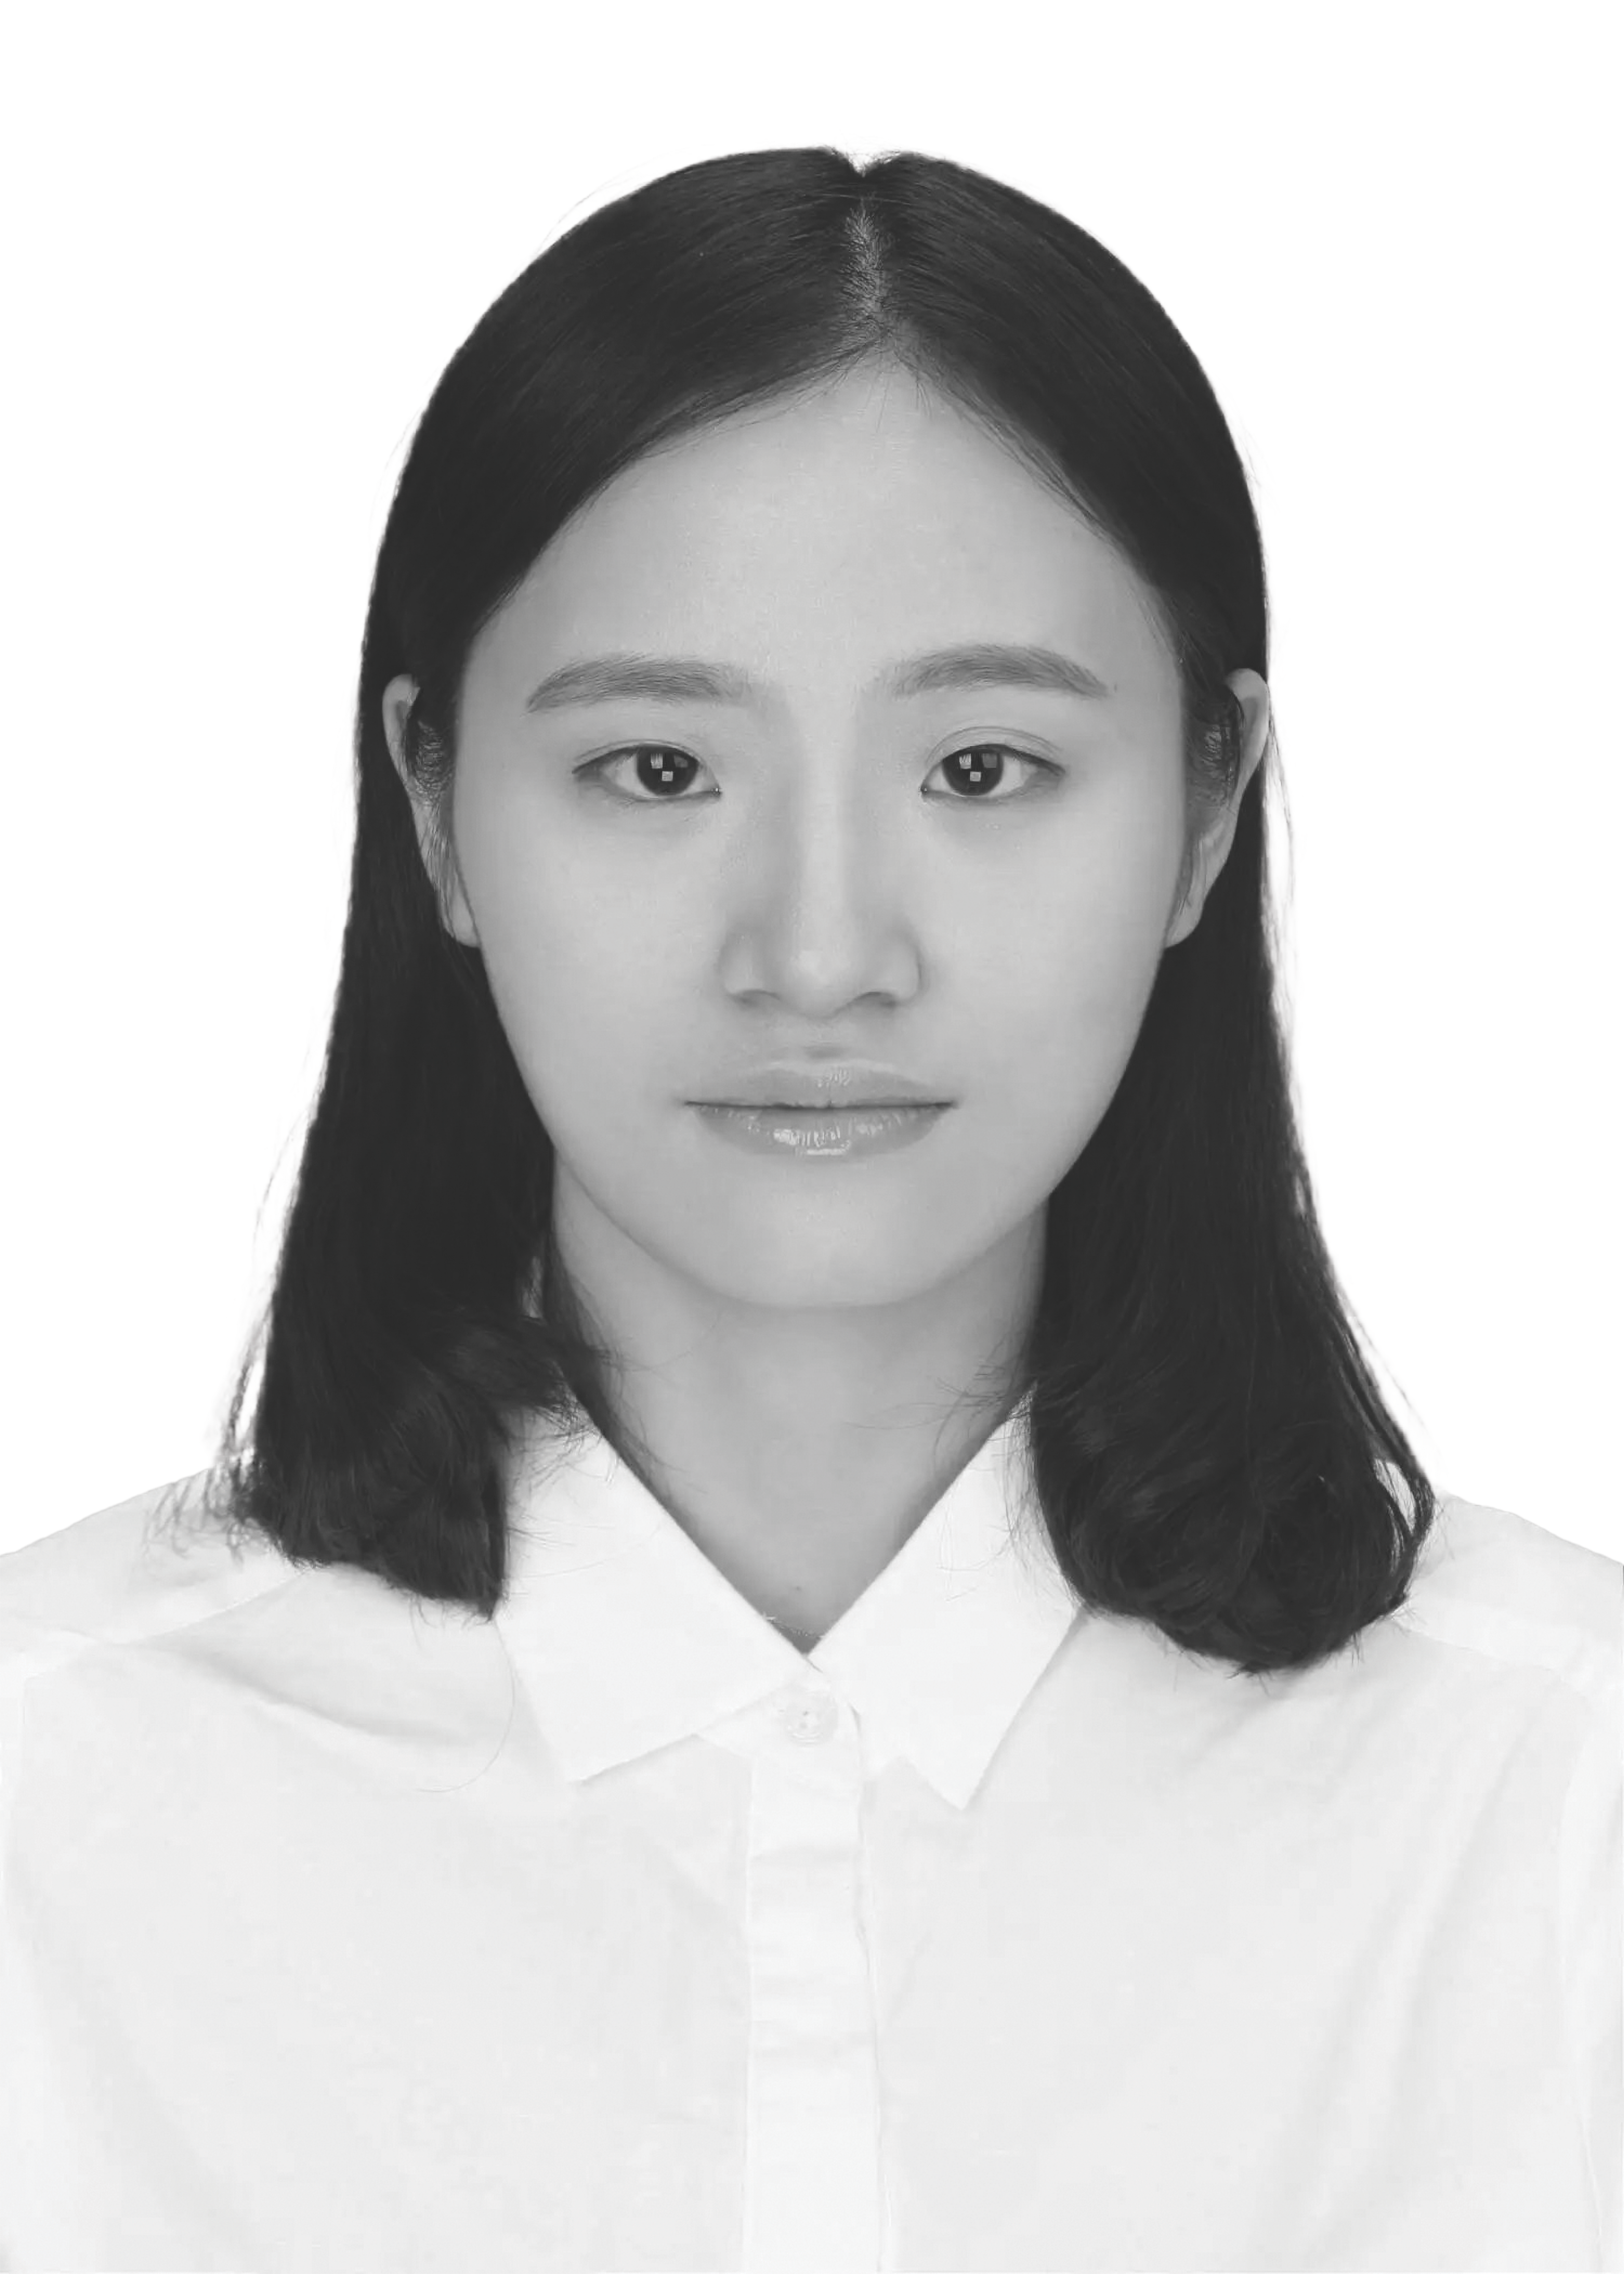 Wang is from the Department of Respiratory Medicine in the Department of Respiratory and Critical Care Medicine, National Key Clinical Specialty at Xiangya Hospital of Central South University in Hunan, China.